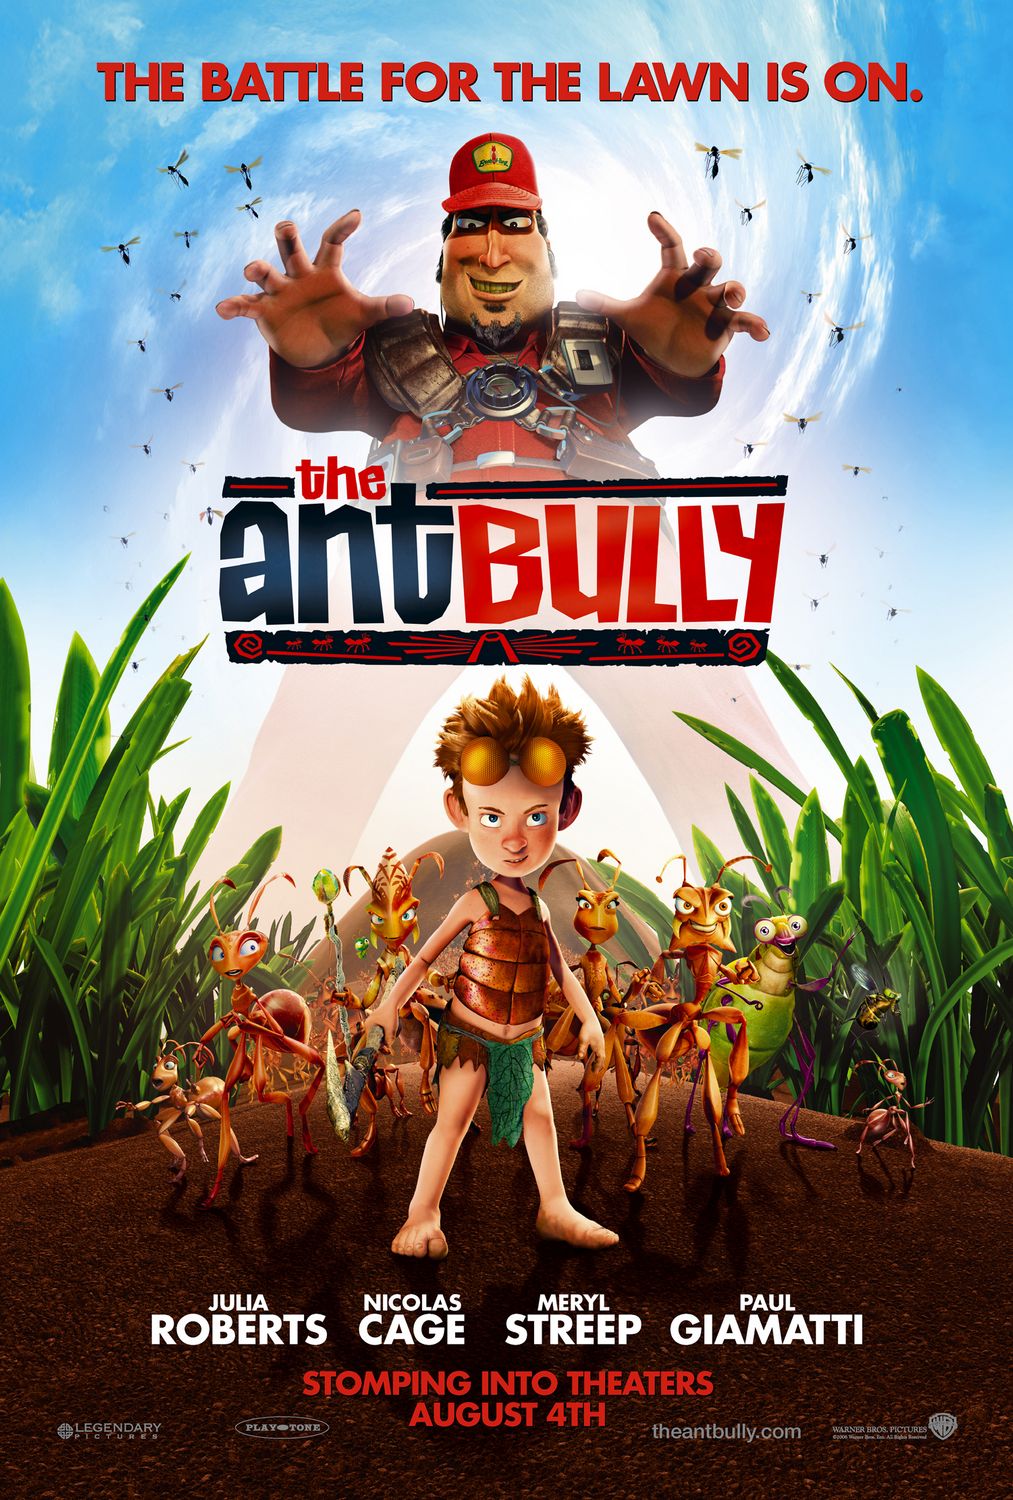 https://static.wikia.nocookie.net/warner-bros-entertainment/images/7/7c/The_Ant_Bully_theatrical_poster.jpg/revision/latest?cb=20170905202341